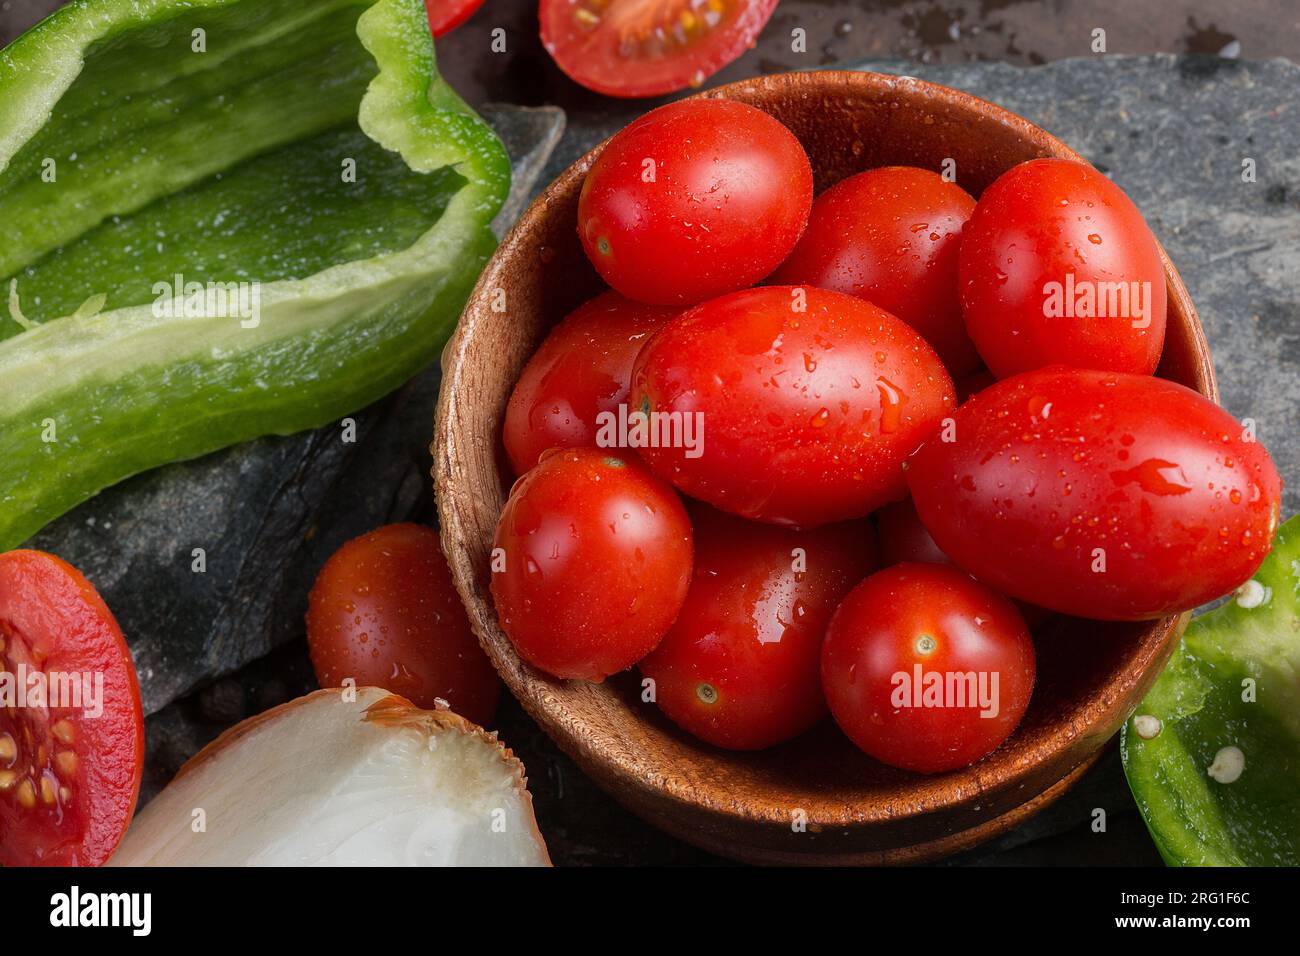 fresh red tomatoes and pepper Stock Photo